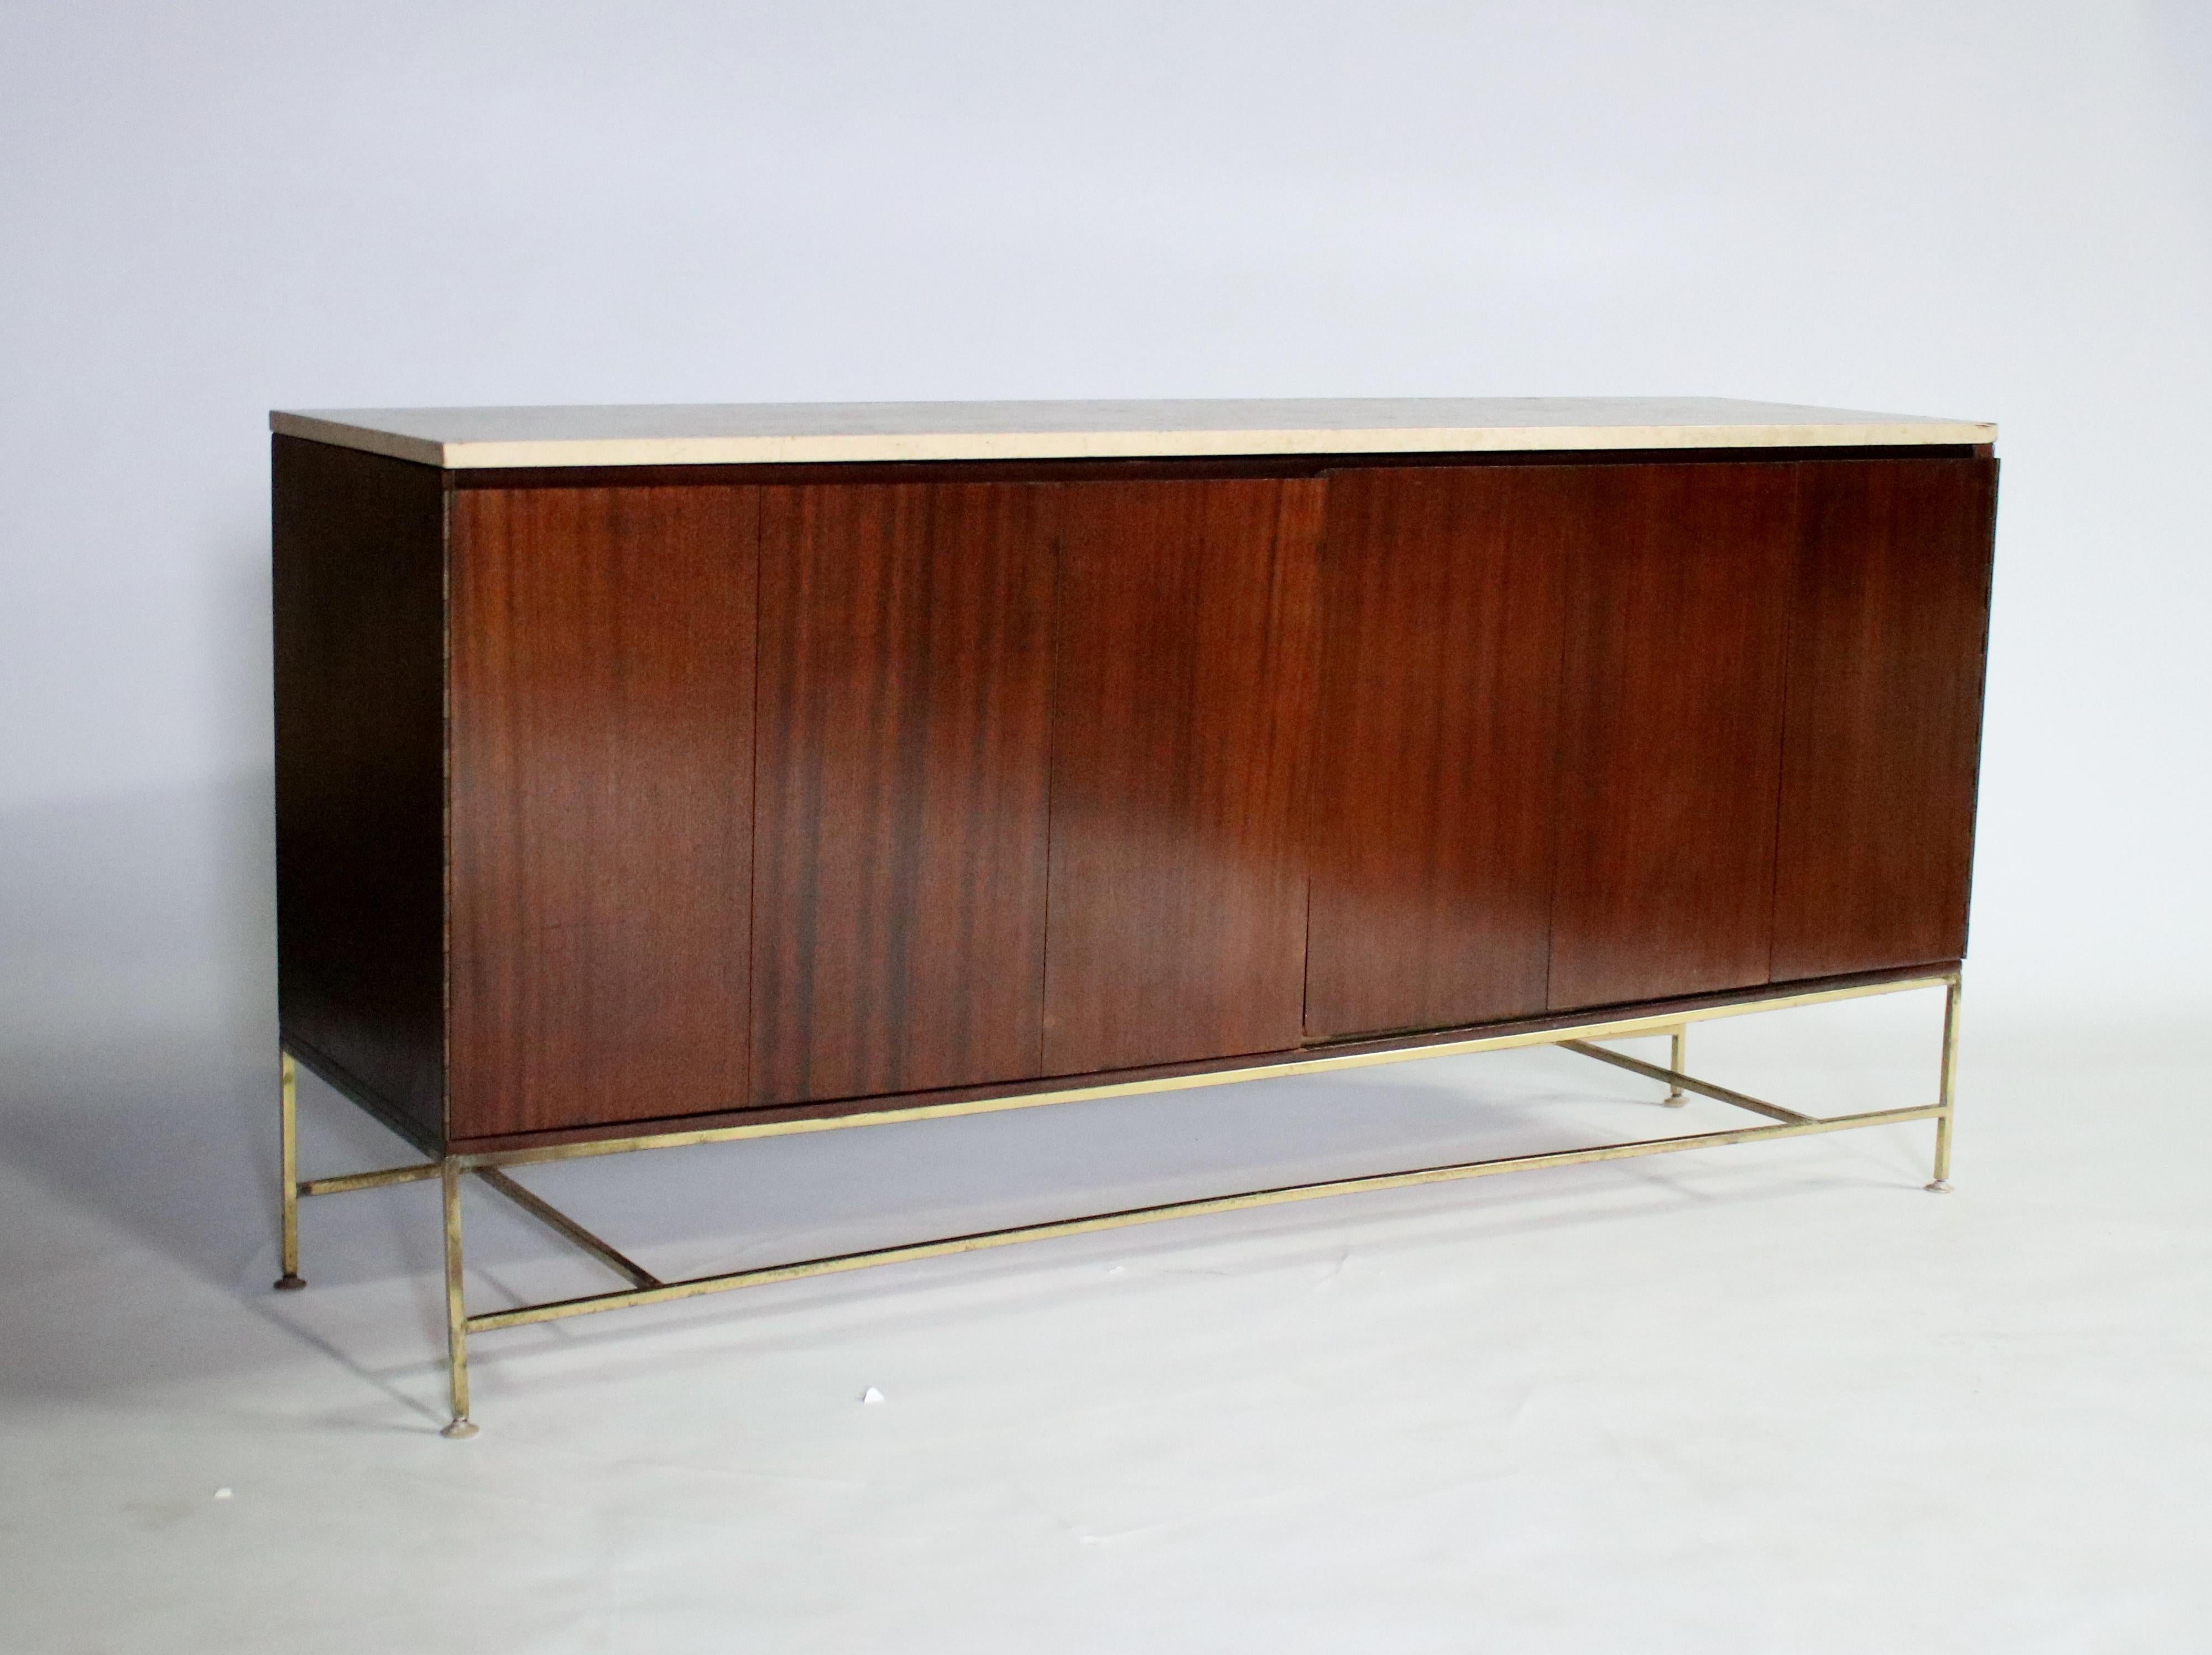 Paul McCobb from Calvin Irwin collection sideboard in original mahogany wood with brass stretchers and a travertine stone top. Accordion-style doors open to reveal a single shelf on the left side while the right side opens to 4 pull-out shelves.